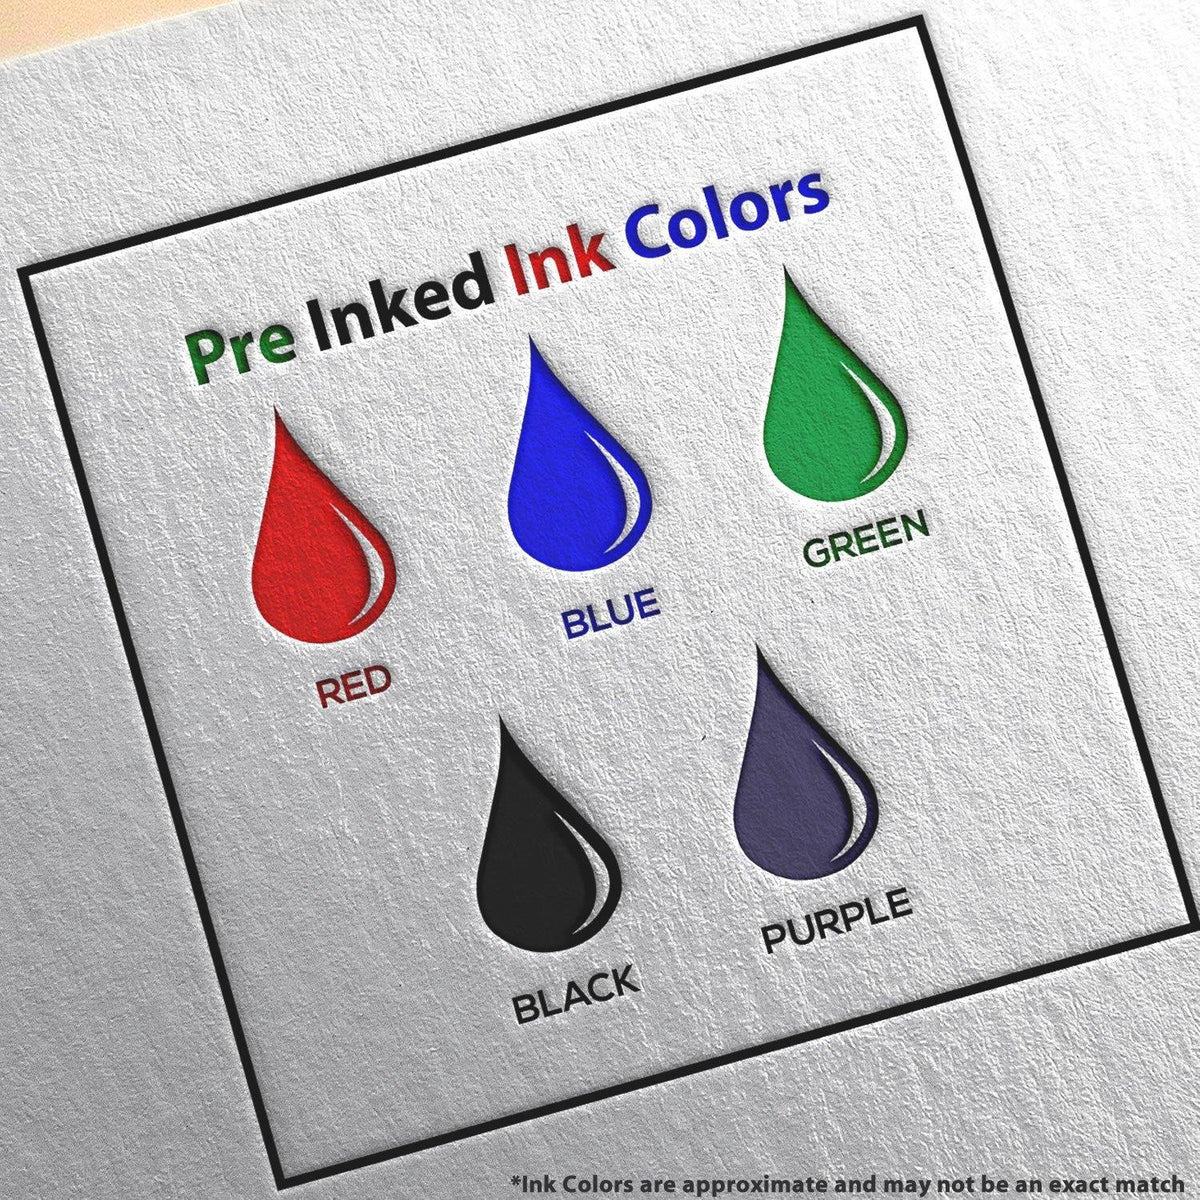 Slim Pre-Inked Posted with Date Box Stamp Ink Color Options